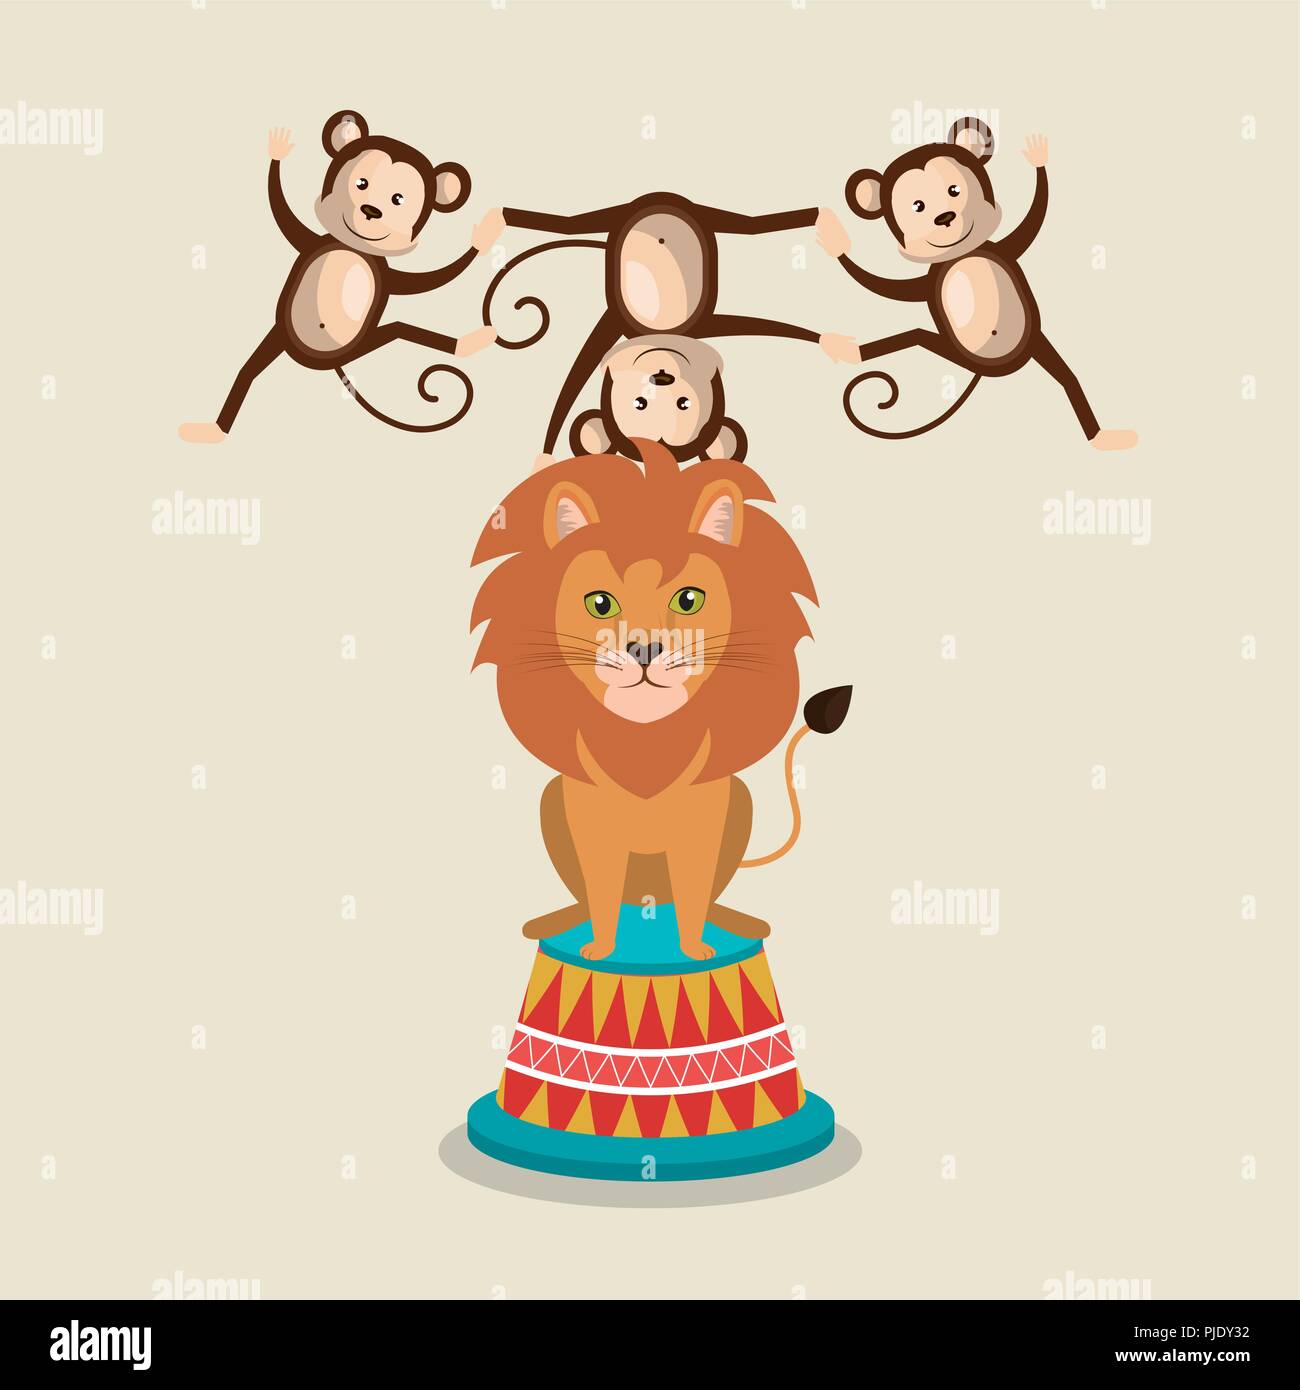 Monkey king play Stock Vector Images - Alamy